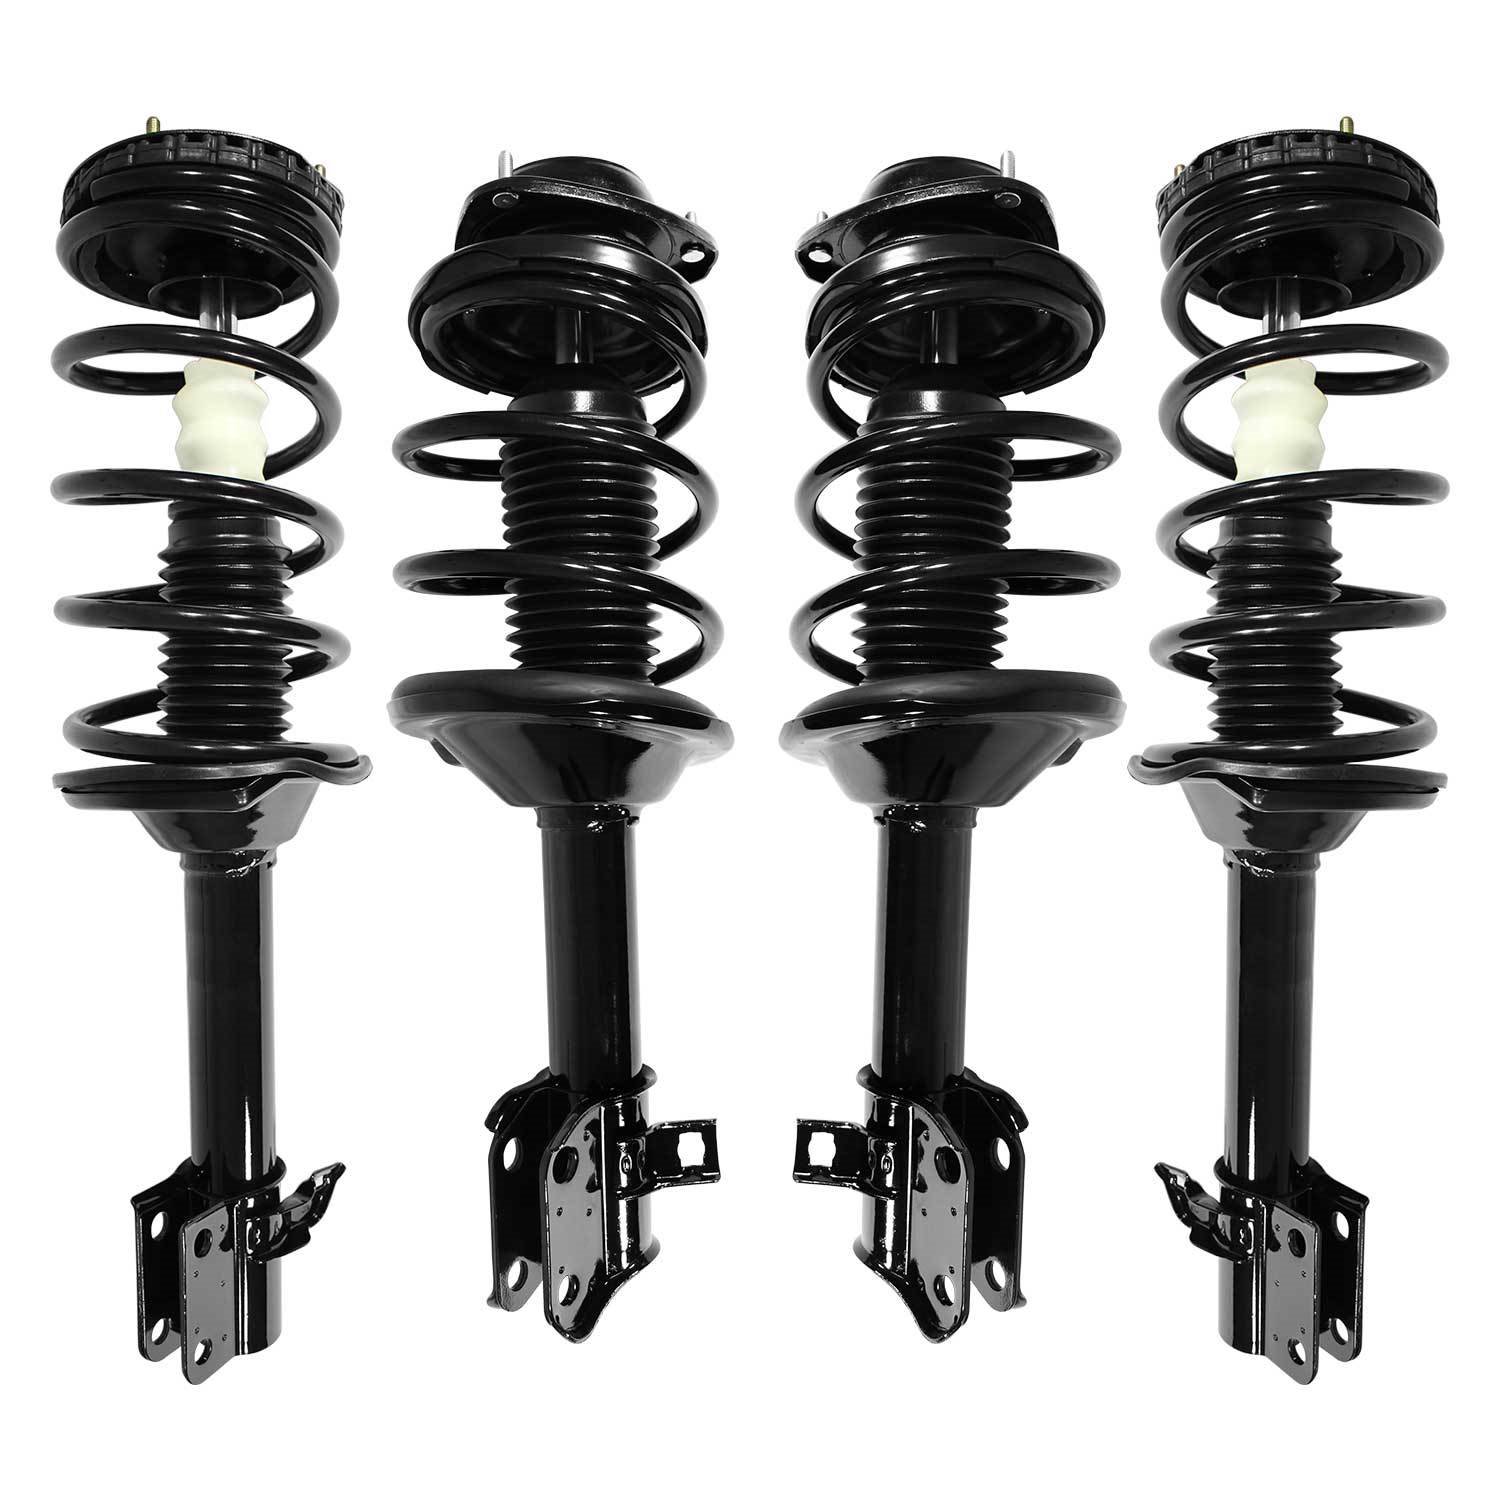 4-11897-15941-001 Front & Rear Suspension Strut & Coil Spring Assembly Kit Fits Select Subaru Forester